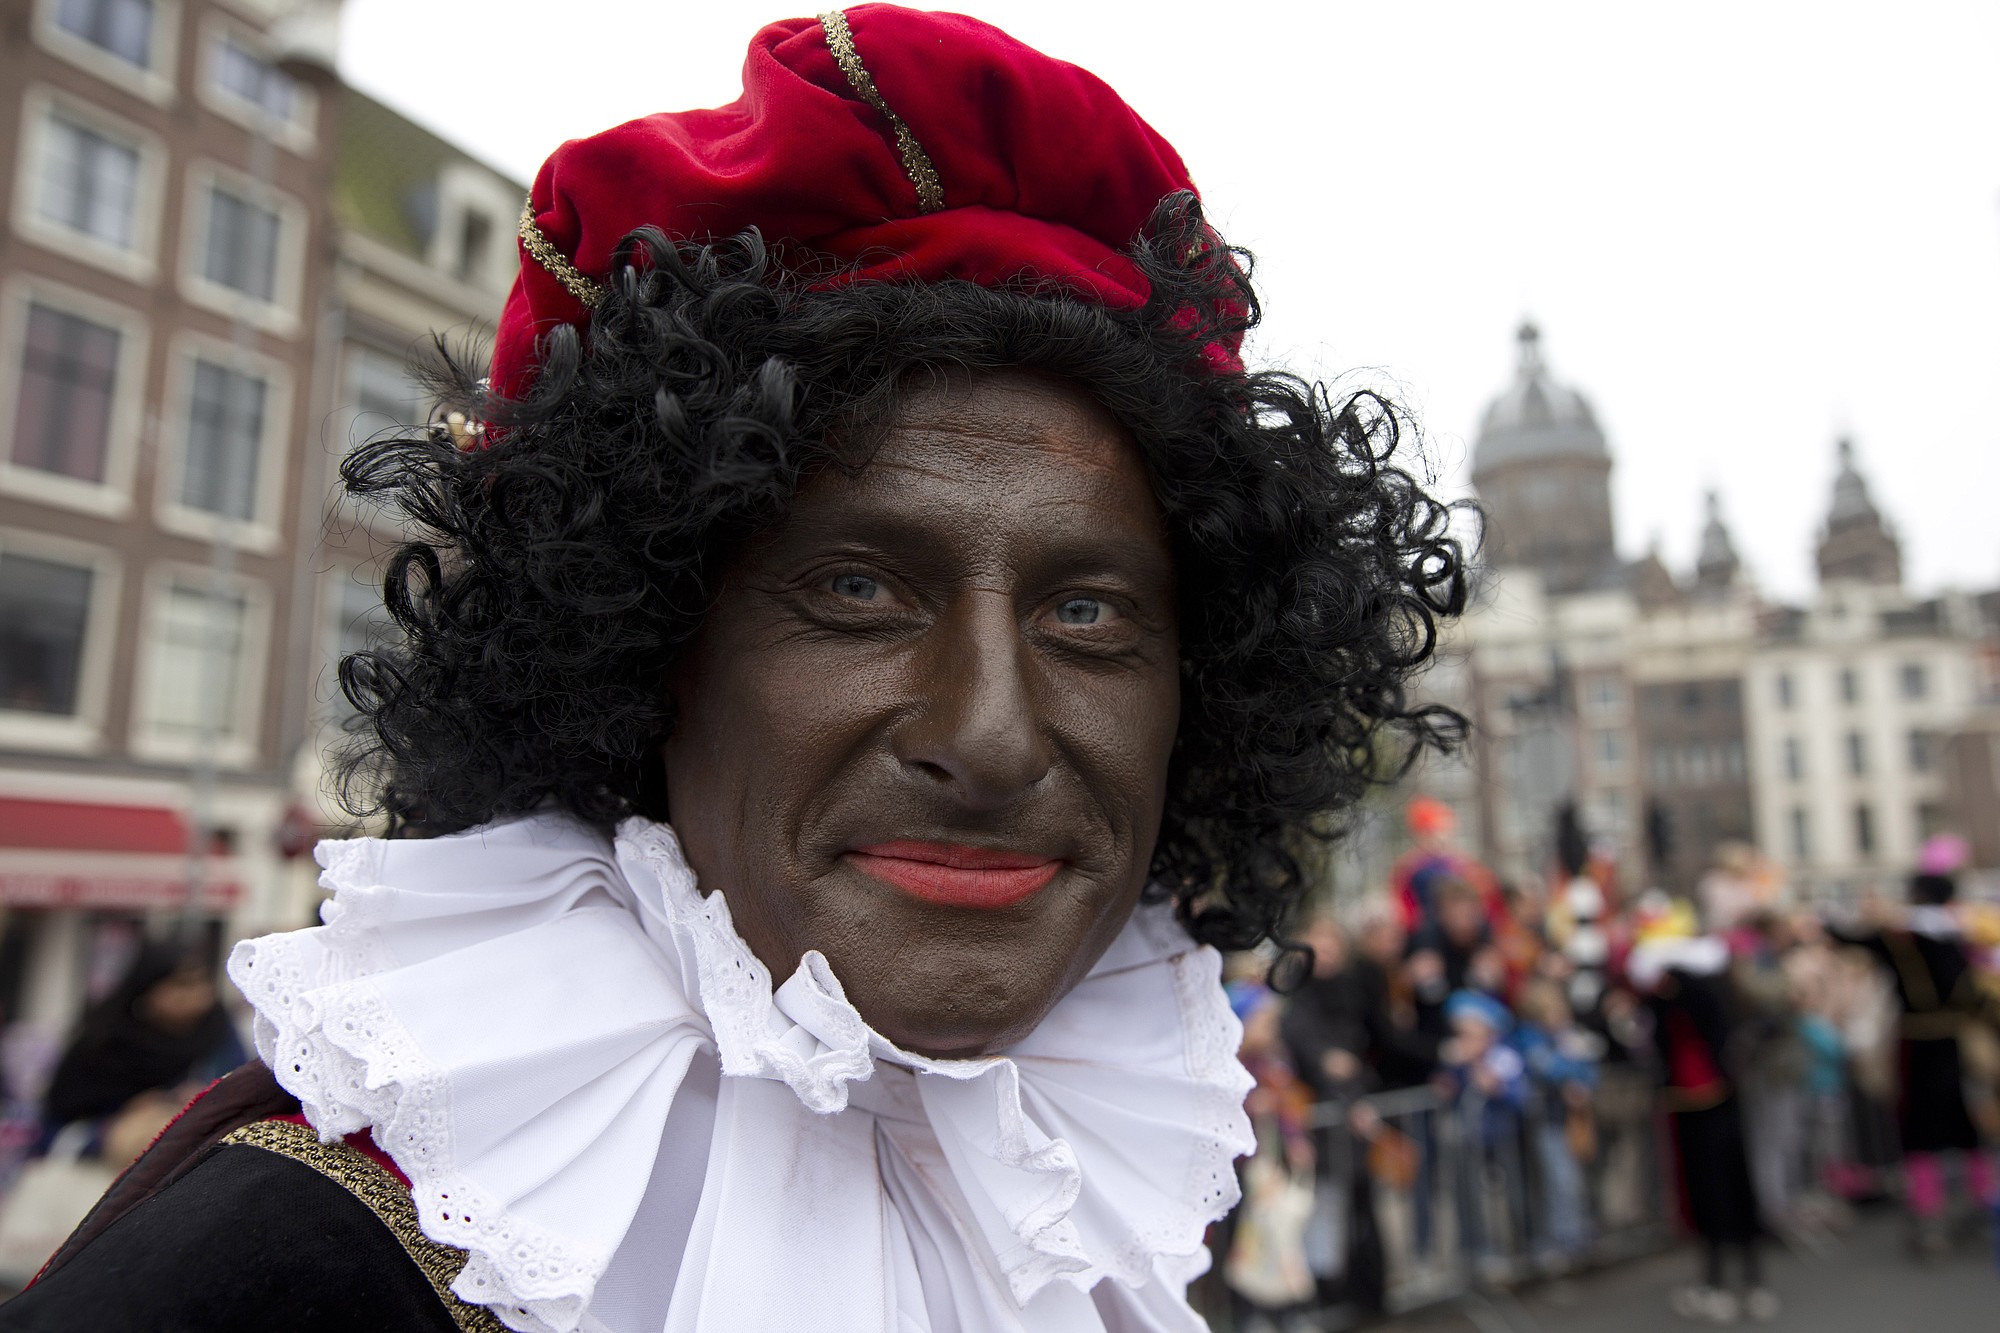 A man is dressed as &quot;Zwarte Piet,&quot; or Black Pete, the sidekick of the Dutch version of Santa Claus, at a 2013 parade in Amsterdam.